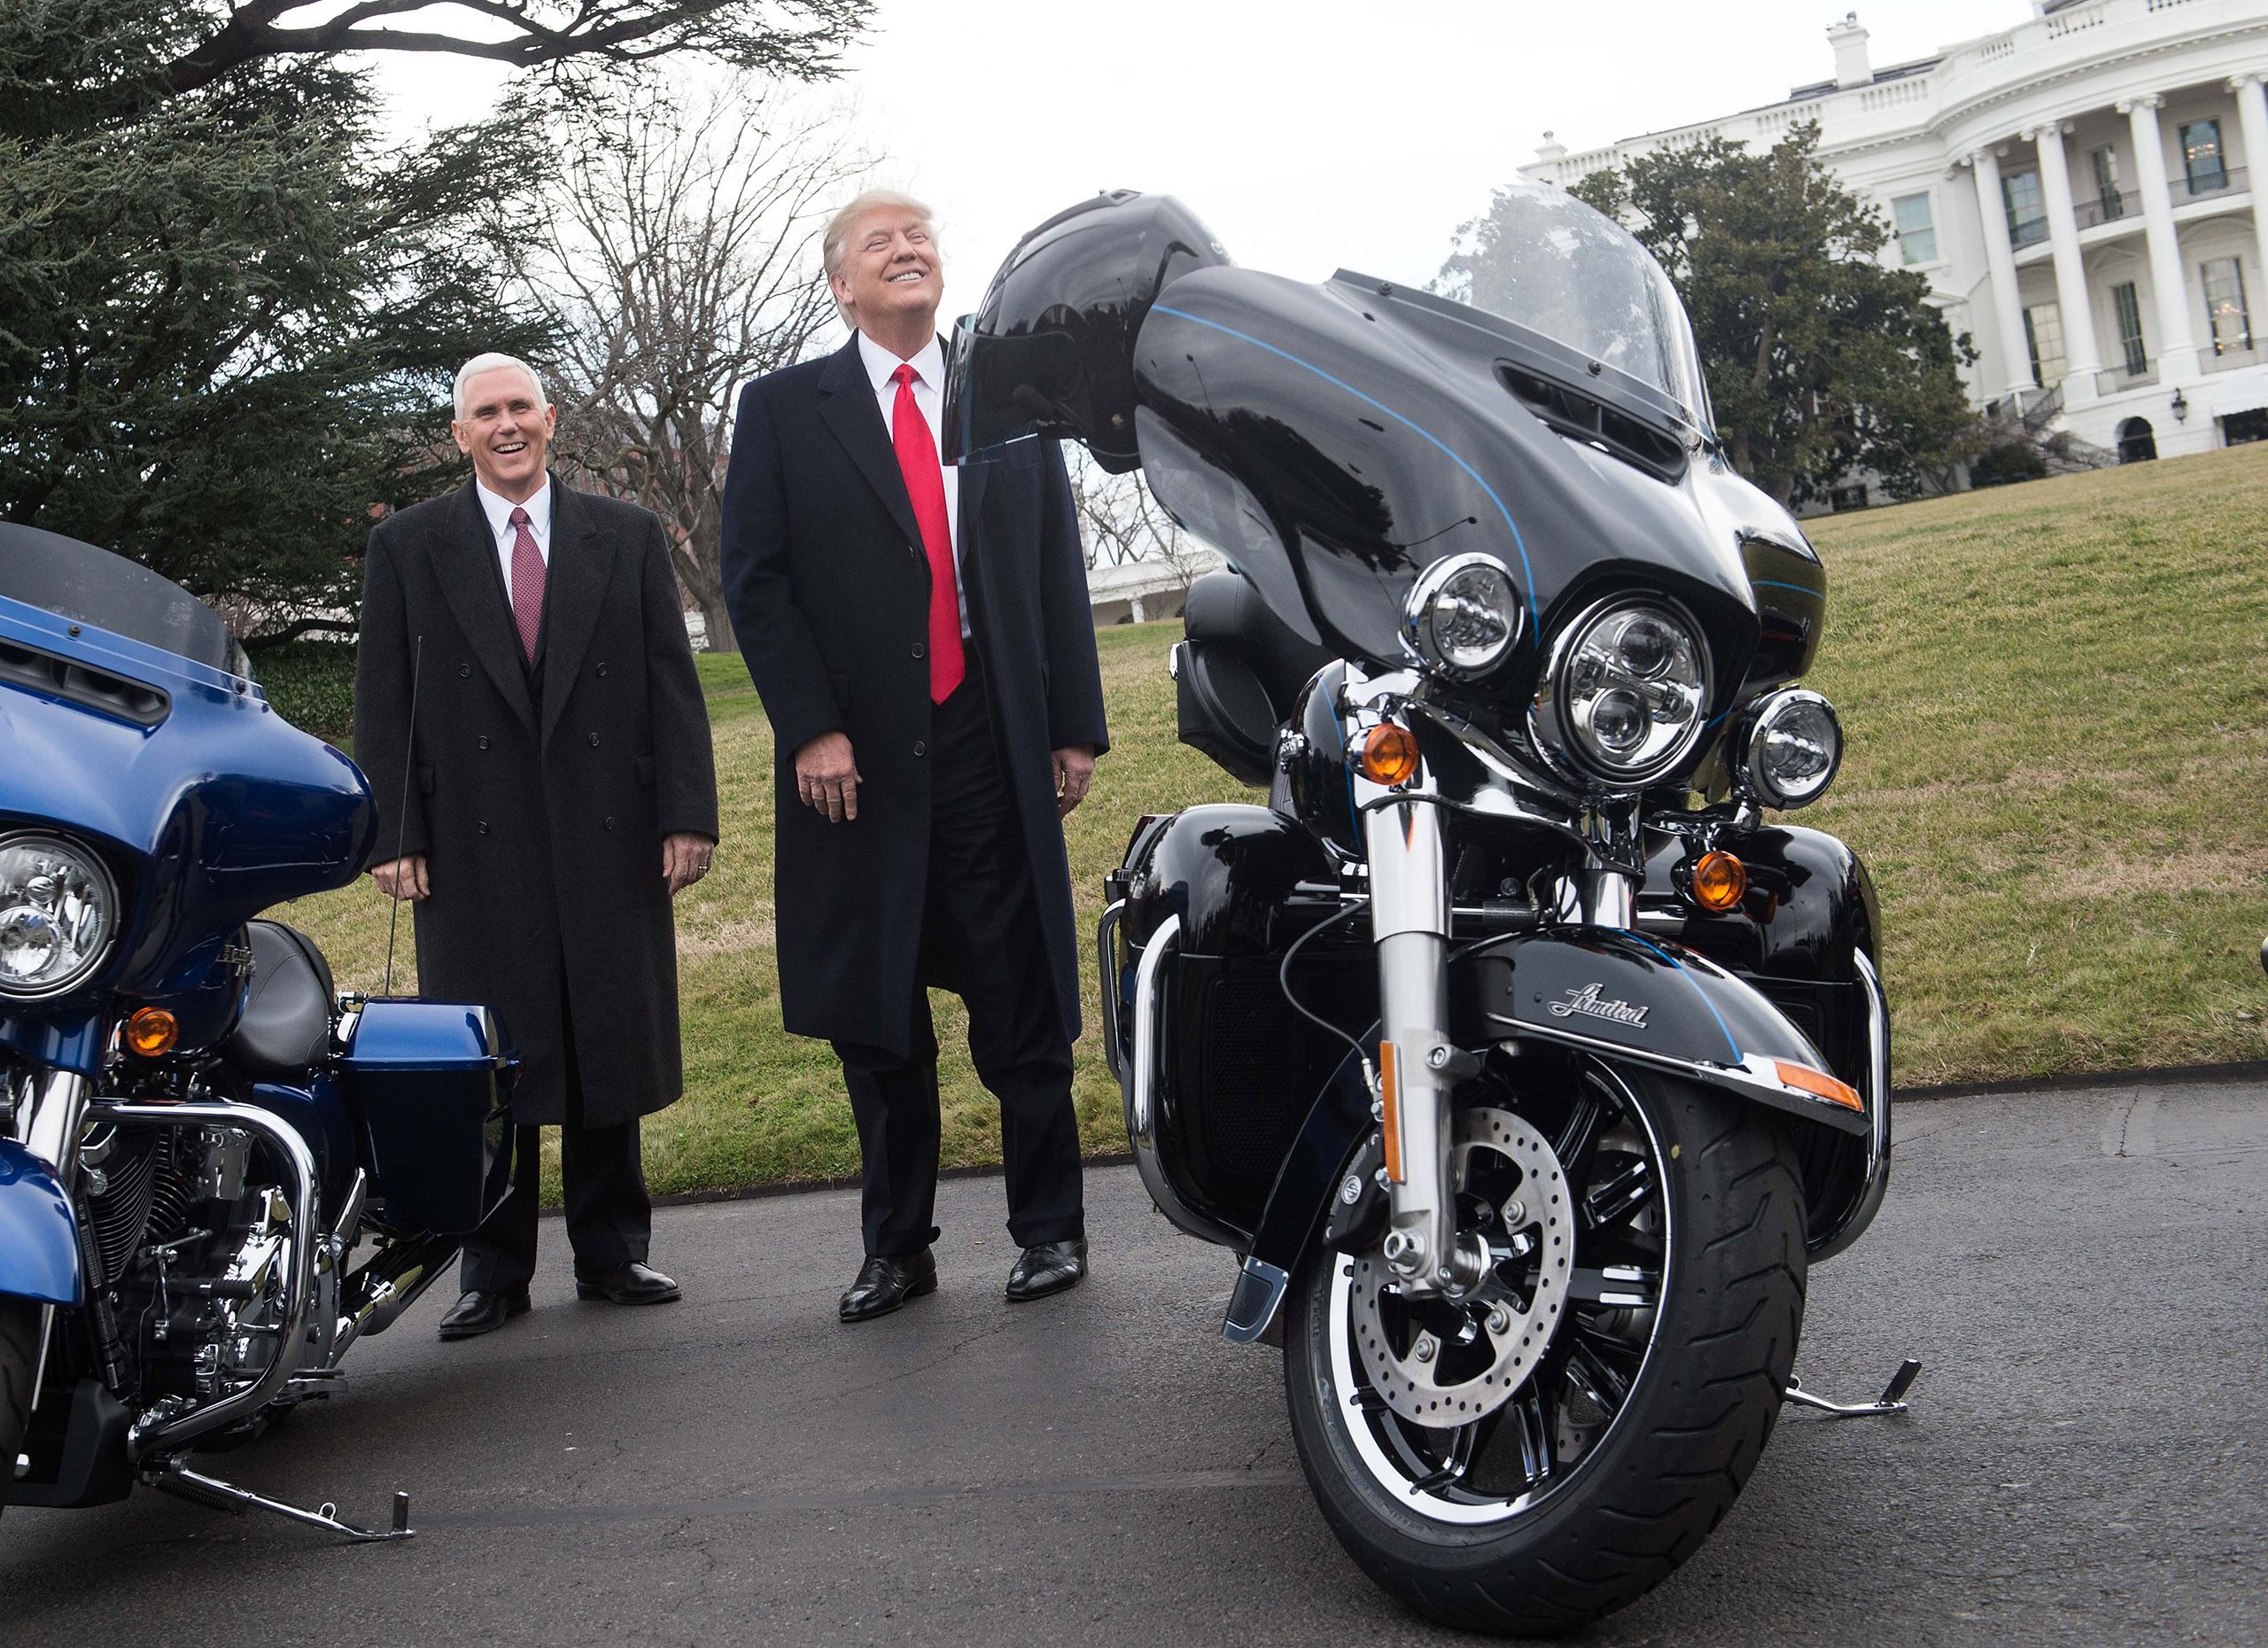 US President Donald Trump jokes with reporters after greeting Harley Davidson executives and union representatives on the South Lawn of the White House in Washington, DC, on February 2, 2017 prior to a luncheon with them.